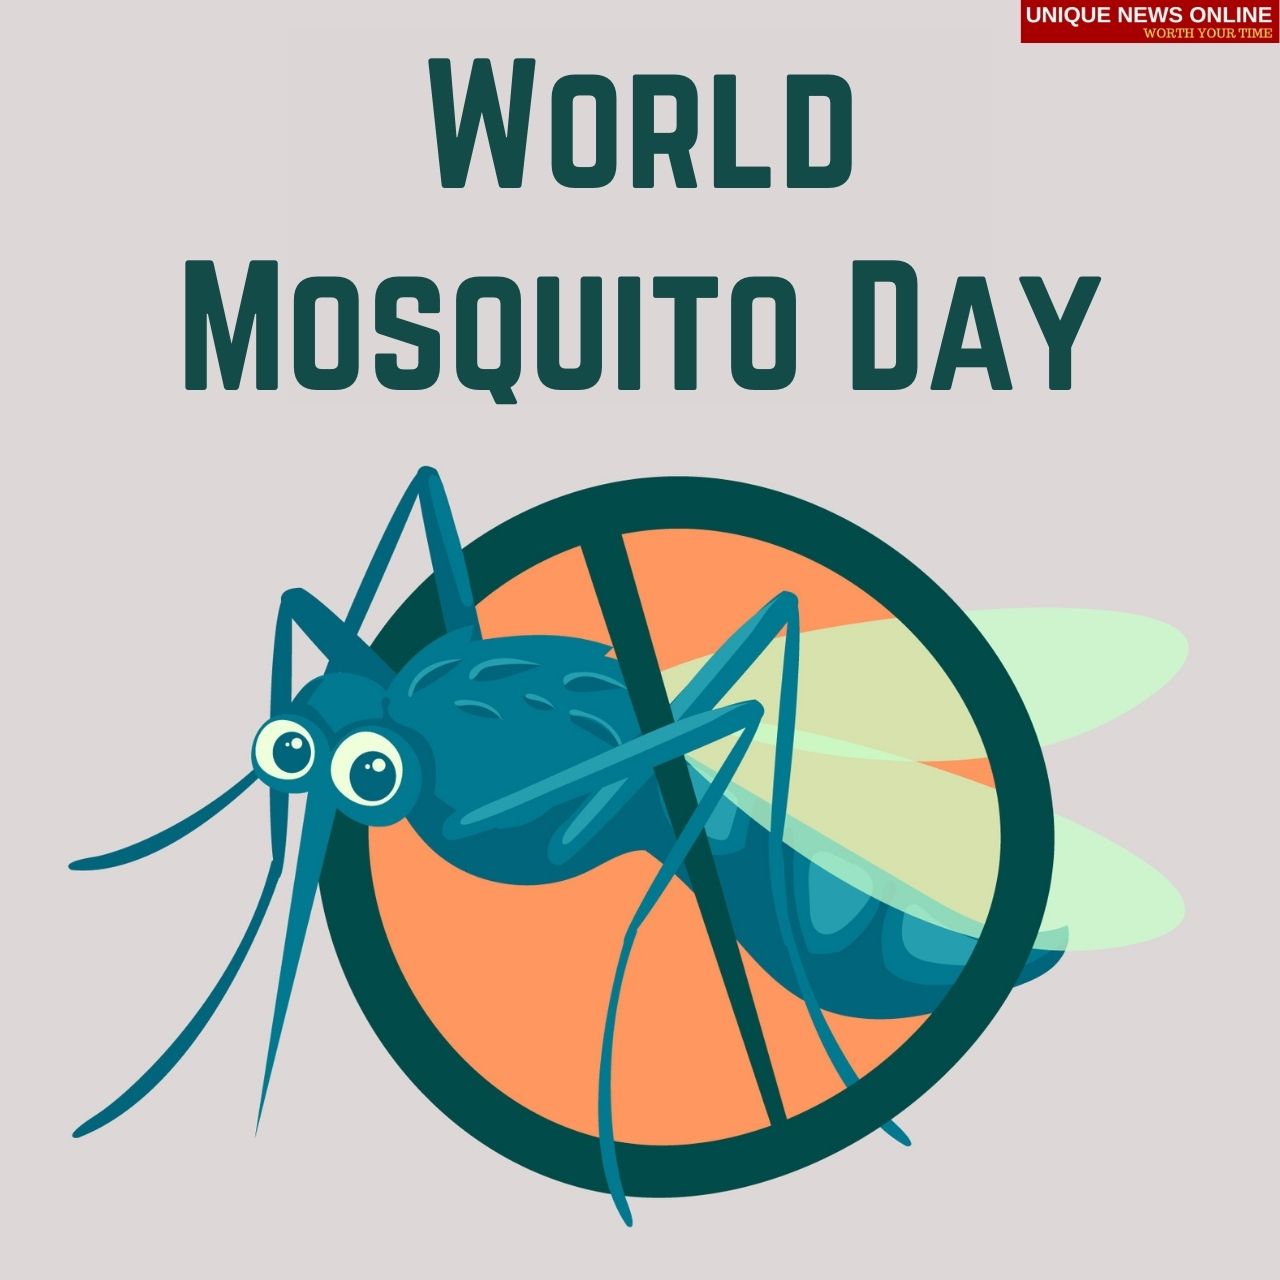 World Mosquito Day 2021 Poster, Quotes, Slogans, Images, and Messages to raise awareness about the causes of malaria and how it can be prevented